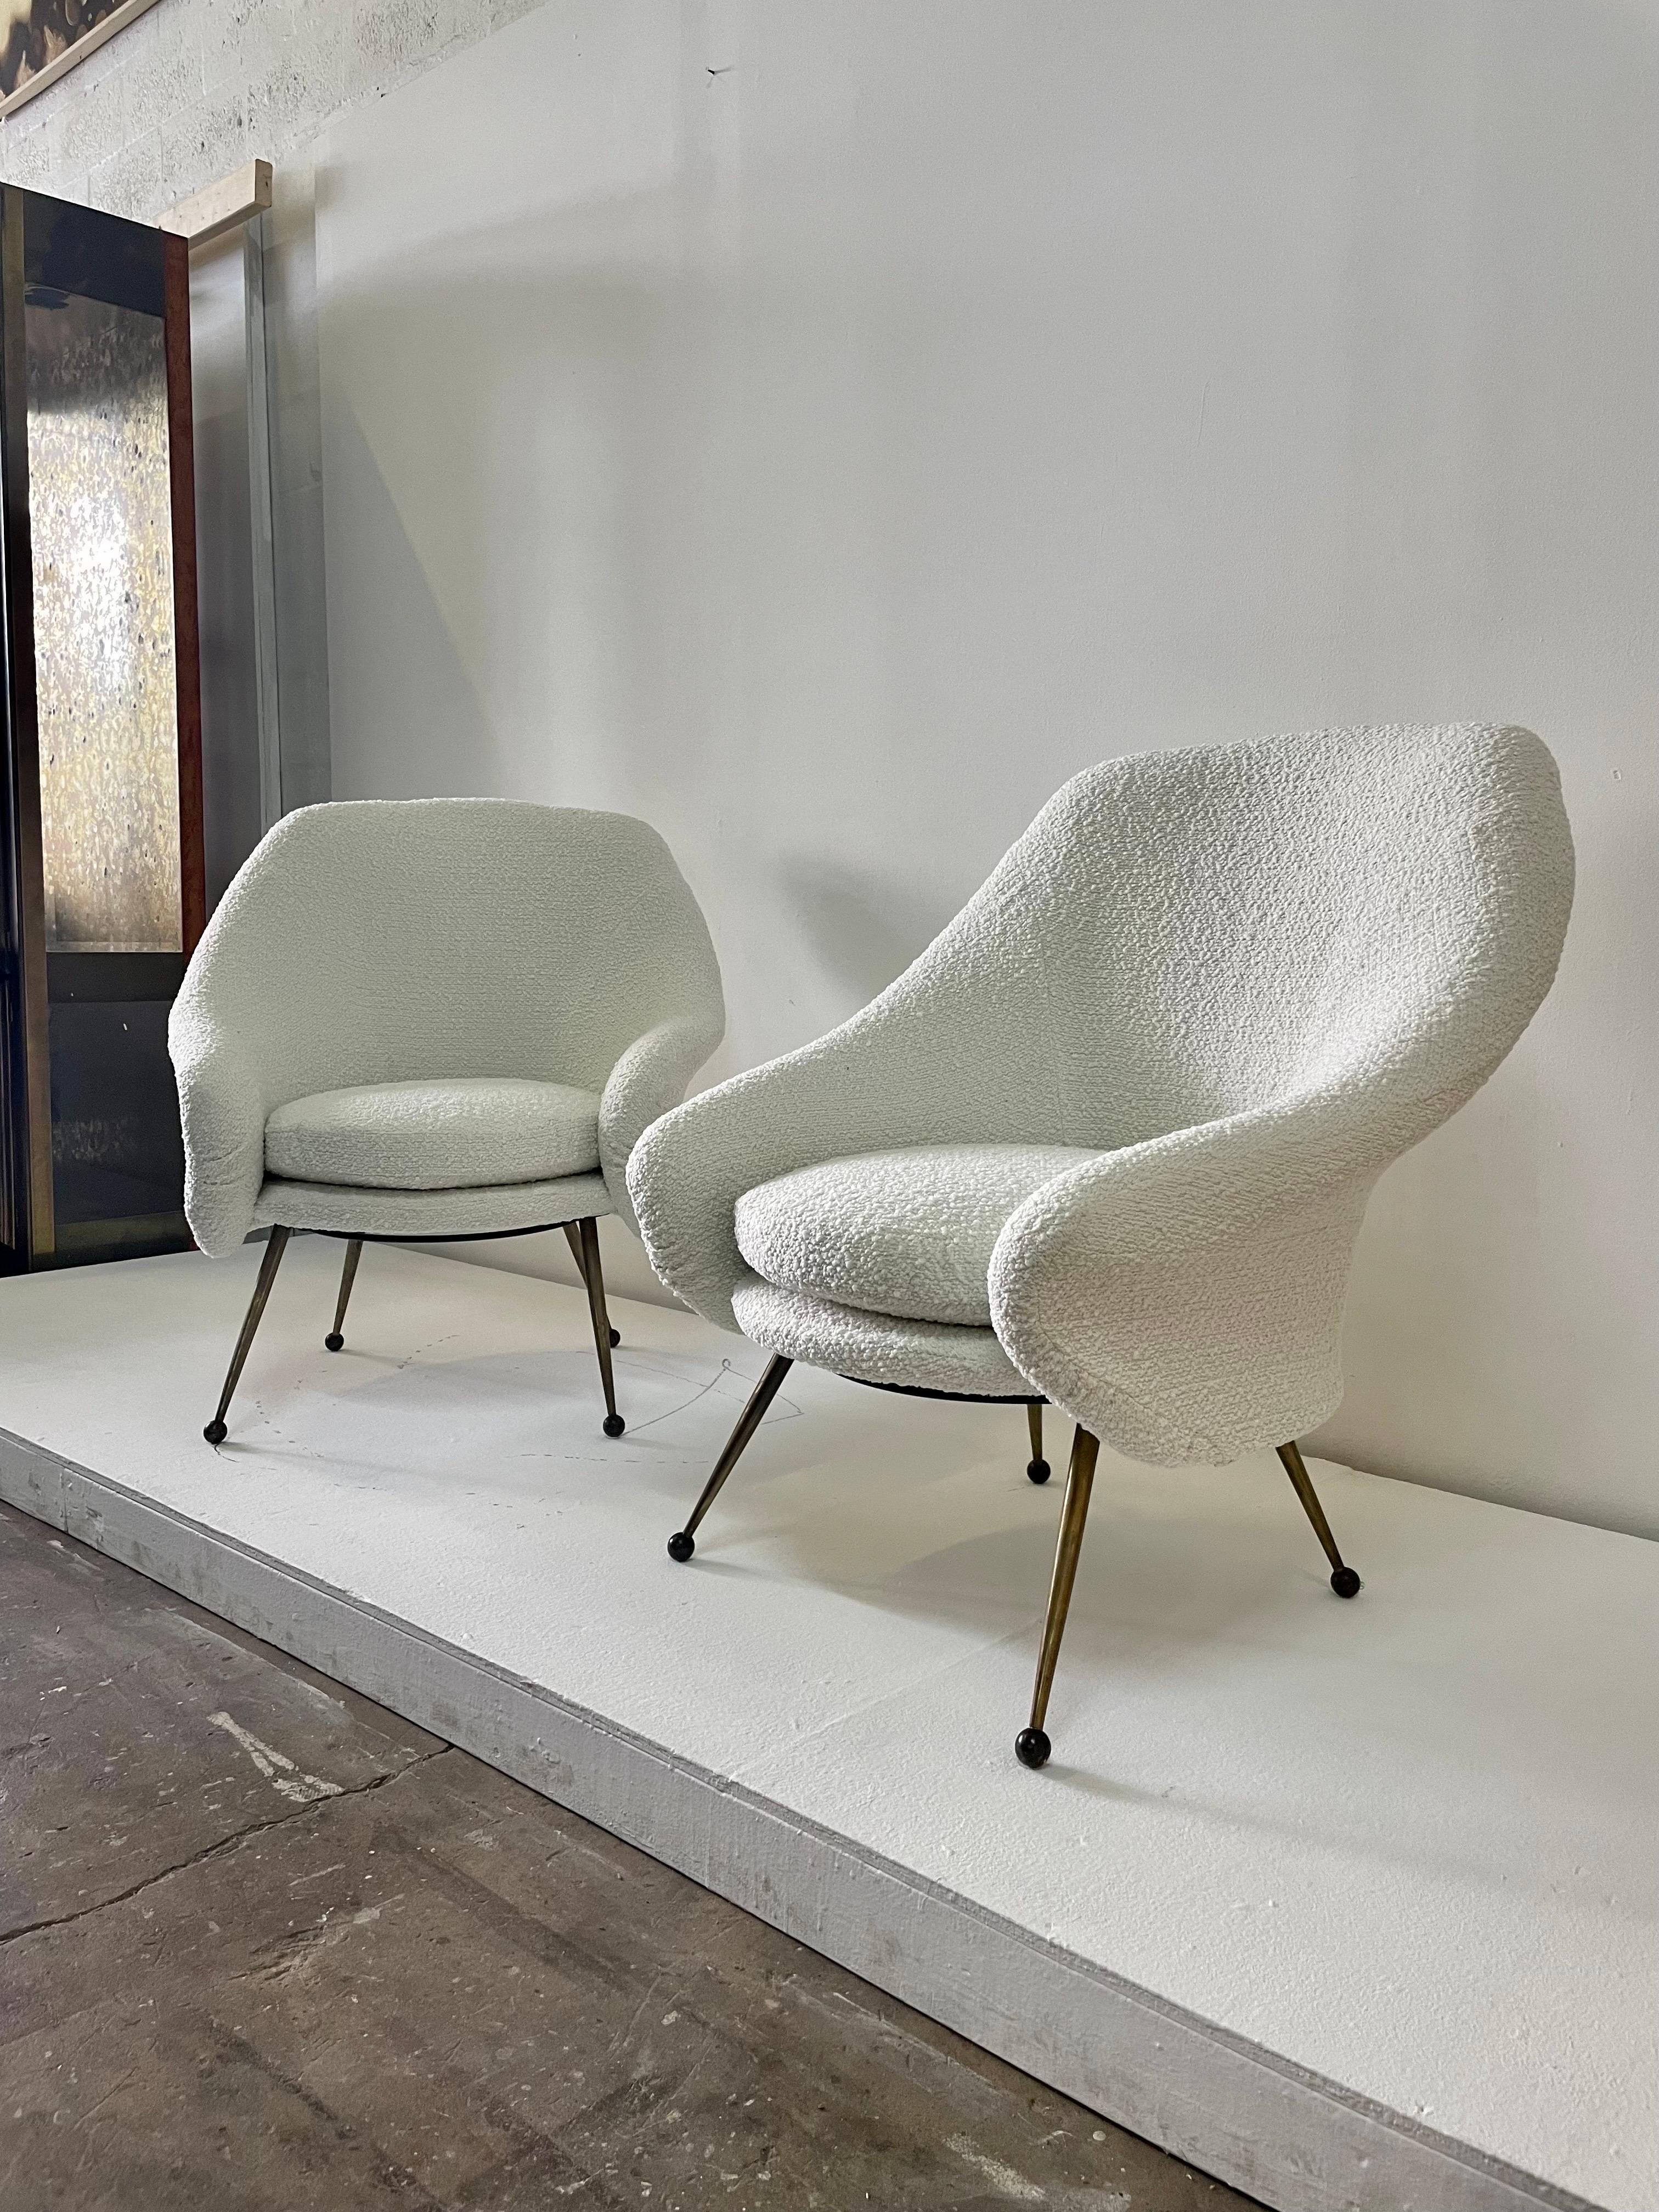 These are a pair of beautiful reupholstered Zanuso chairs with luxurious boucle fabric - ready to place in your high design space.